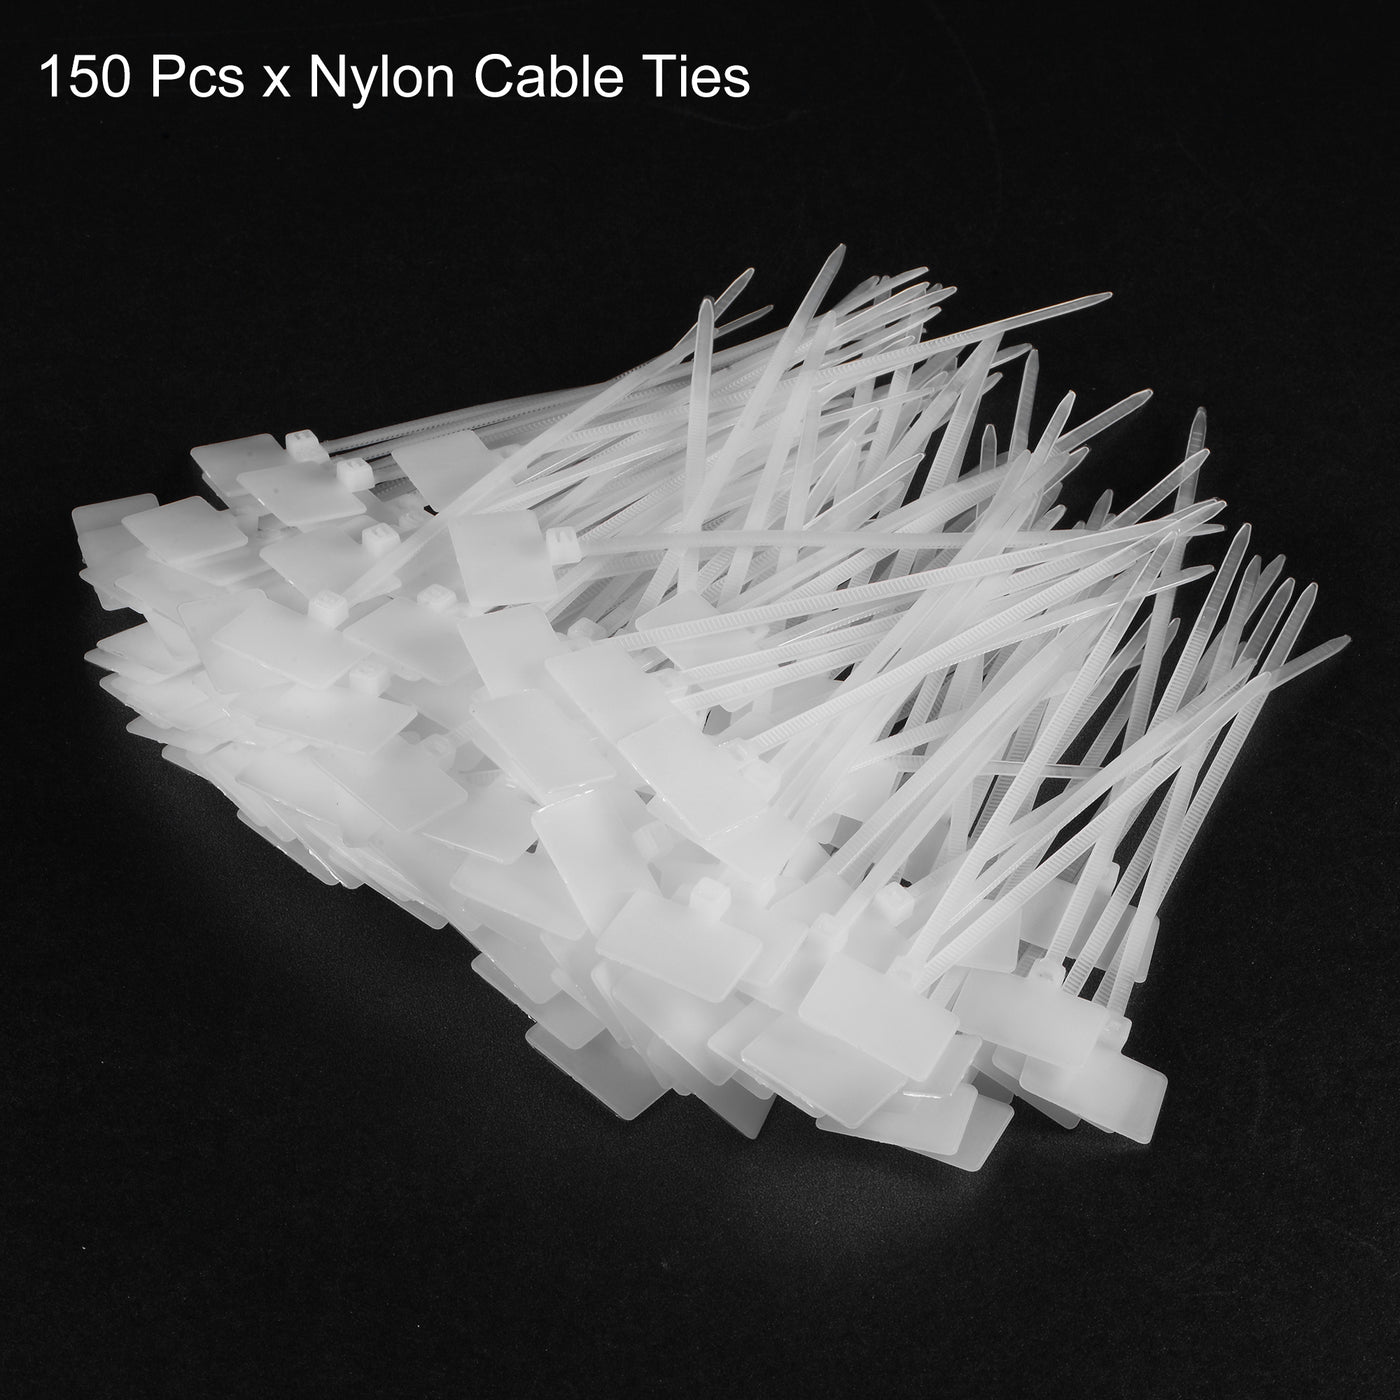 uxcell Uxcell 150pcs Nylon Cable Ties Tags Label Marker Self-Locking for Marking Organizing 100mm White